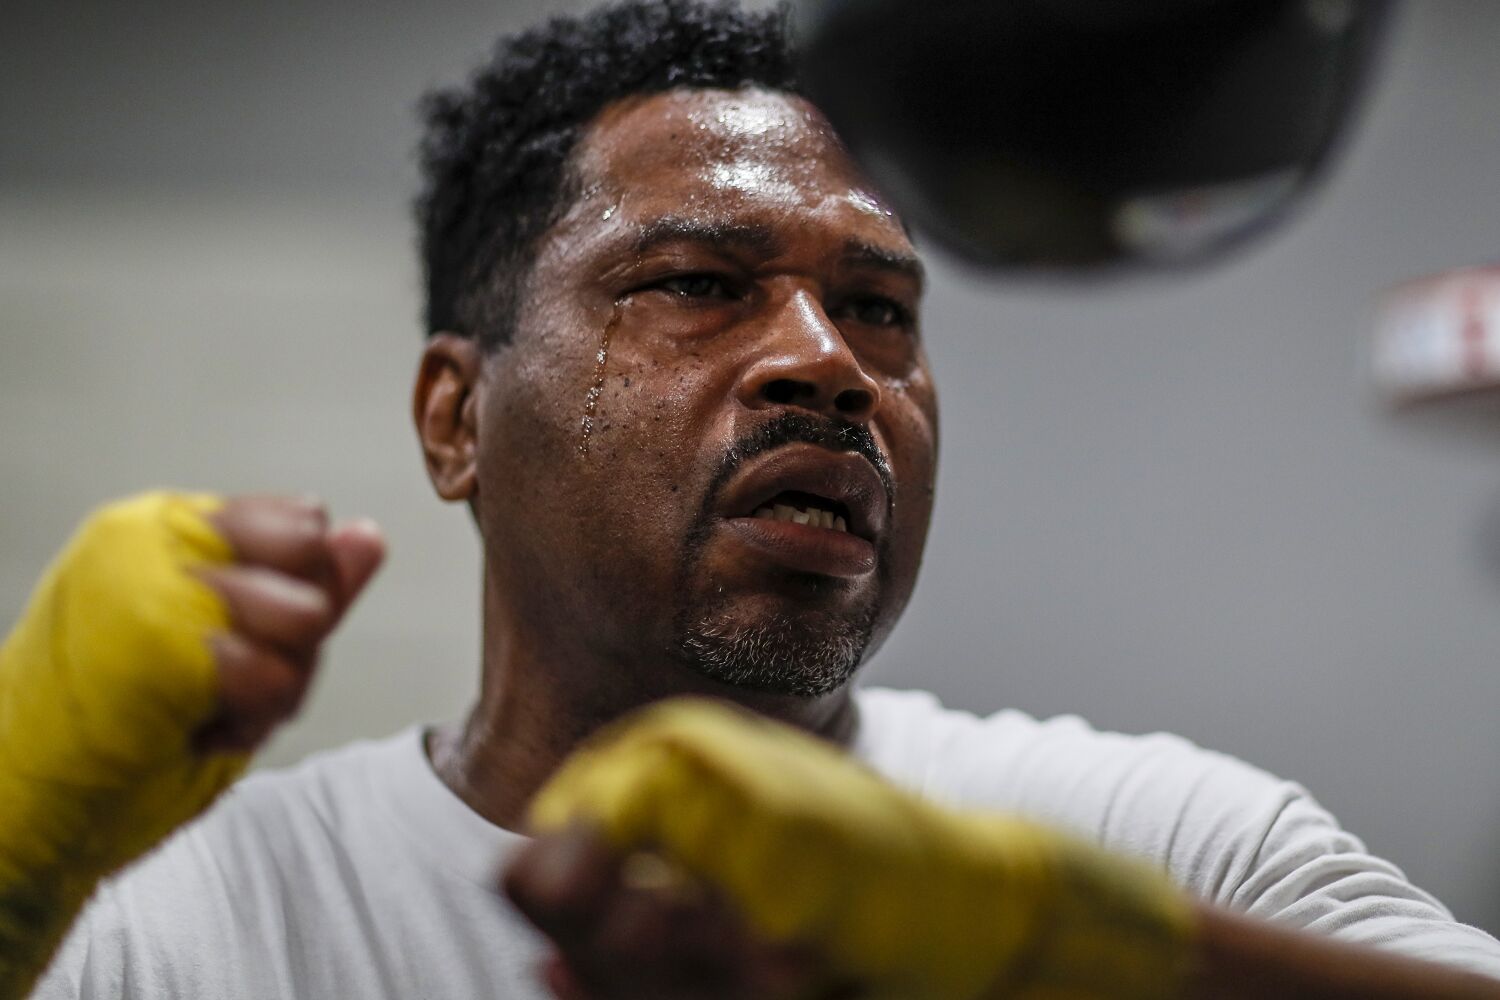 California to step up efforts to find boxers owed pensions following Times report